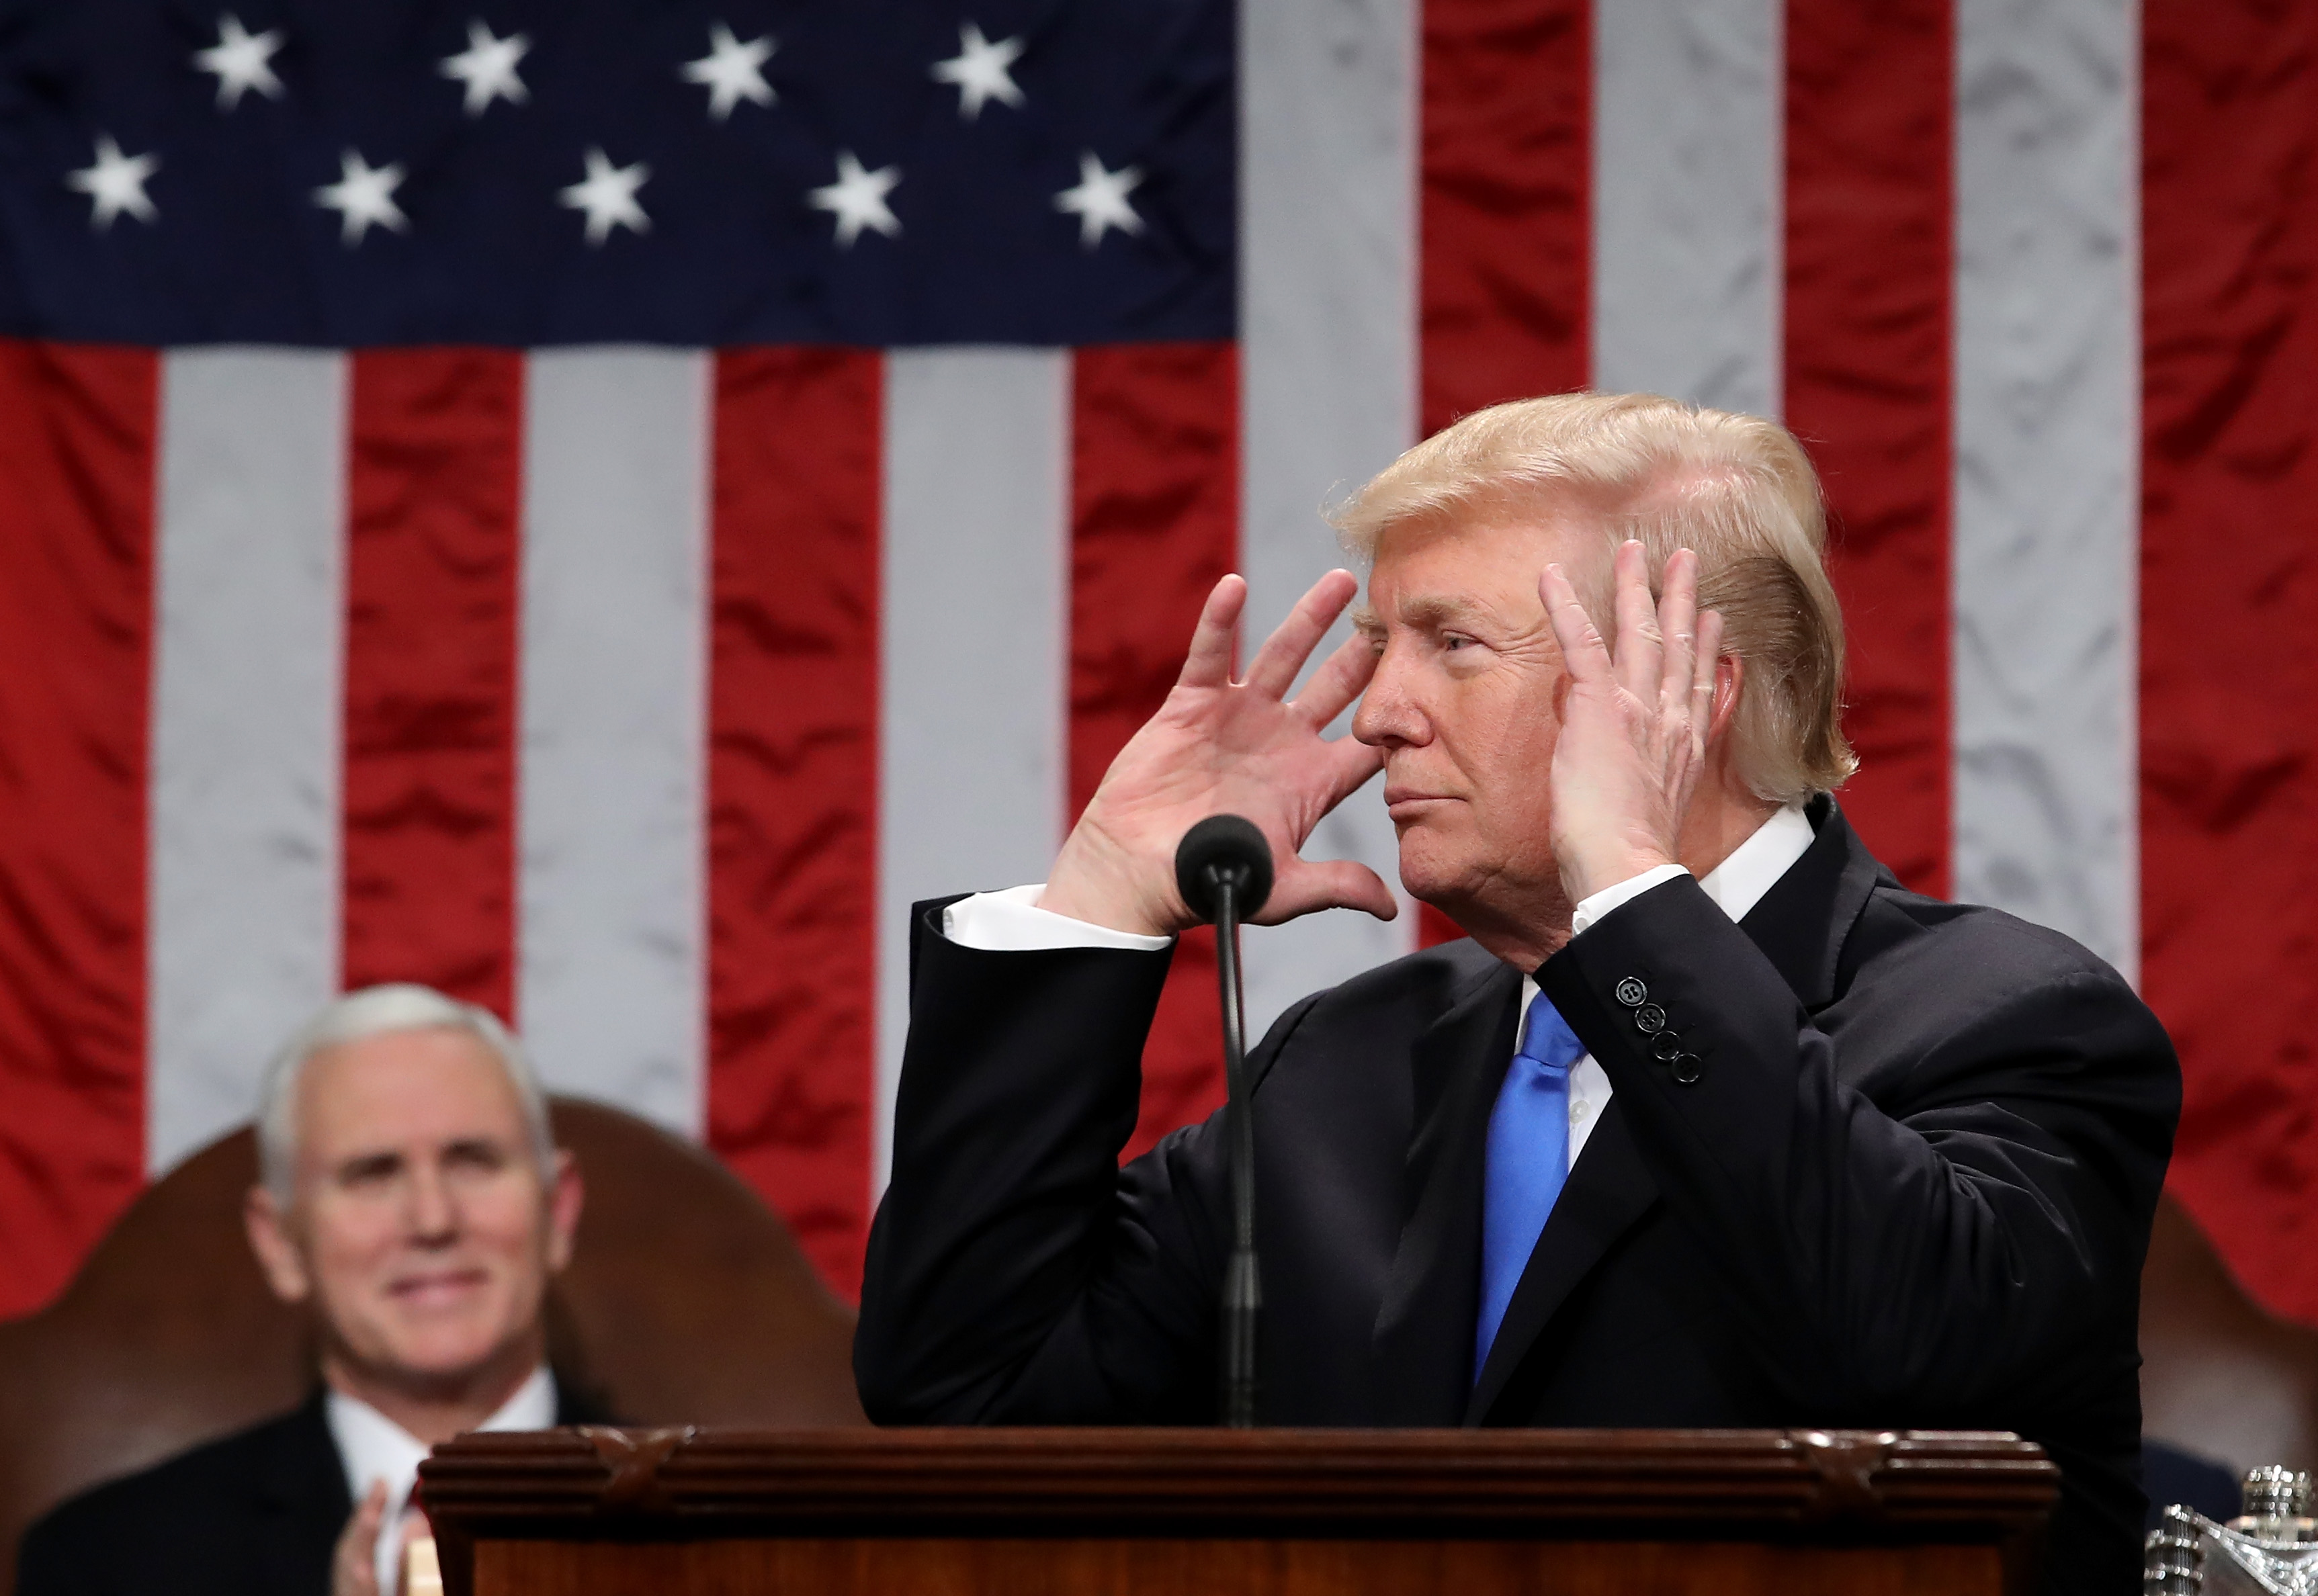 WASHINGTON, DC - JANUARY 30:  U.S. President Donald J. Trump delivers the State of the Union address in the chamber of the U.S. House of Representatives January 30, 2018 in Washington, DC. This is the first State of the Union address given by U.S. President Donald Trump and his second joint-session address to Congress.  (Photo by Win McNamee/Getty Images) (Win McNamee&mdash;Getty Images)